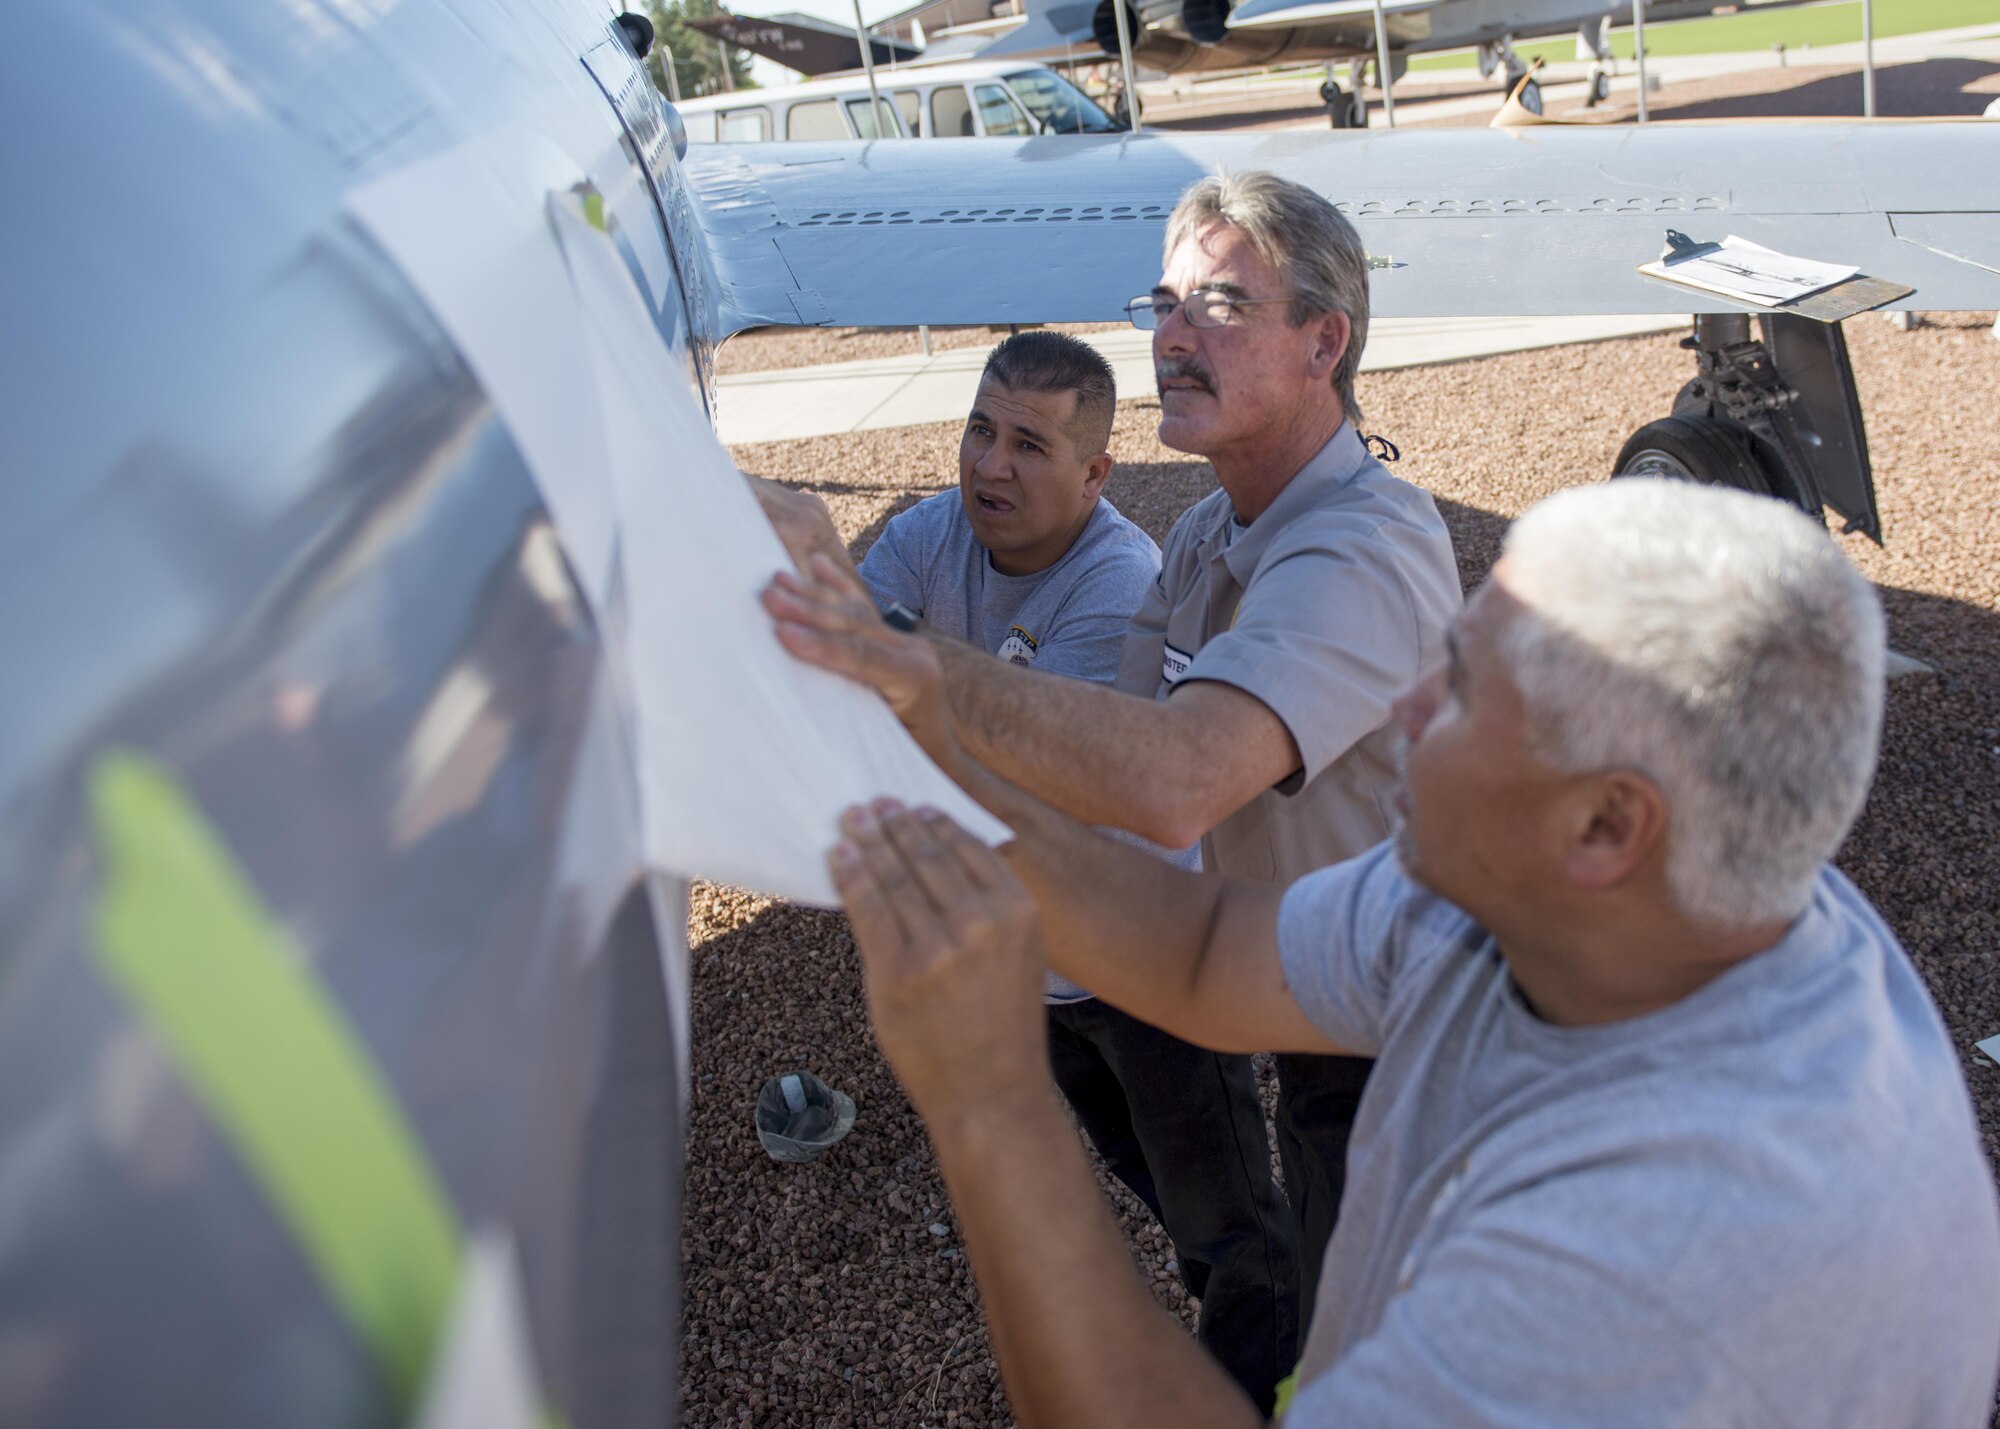 From left to right: Jesse, Mike, and Frank, M1 Support Systems aircraft corrosion specialists at Holloman Air Force Base N.M., pull of the outer sheet of a decal to an F-84F Thunderstreak at Heritage Park here May 16. These contractors sand and re-paint two aircraft inside Heritage Park each year to keep them from corroding. (Last names are being withheld do to operational requirements) (U.S. Air Force photo by Airman 1st Class Randahl J. Jenson) 